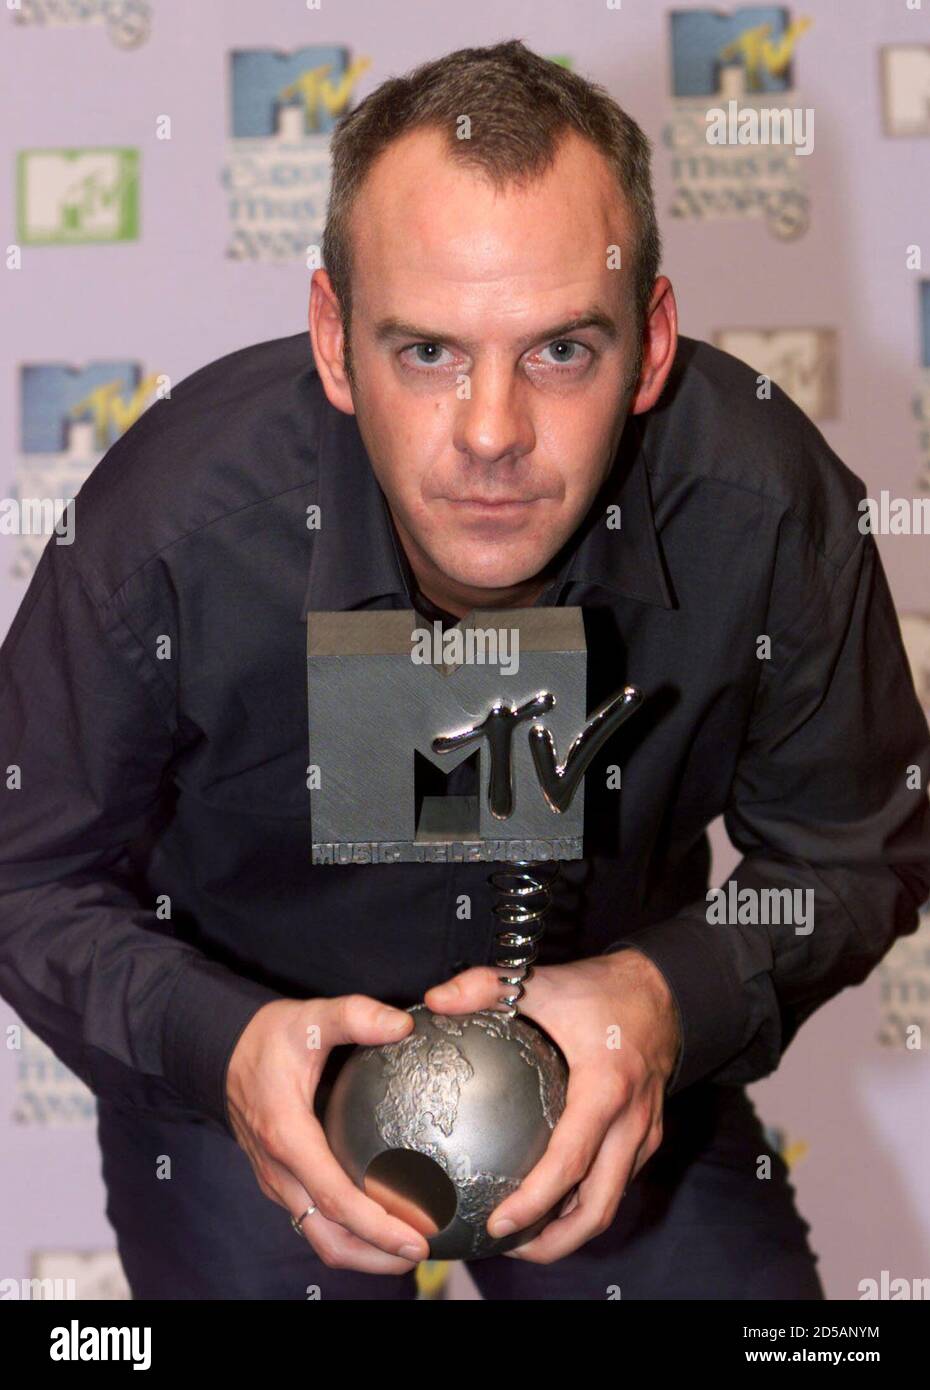 Norman Cook, otherwise known as D.J. Fatboy Slim, poses with his award for best  Dance Act at the MTV Europe awards ceremony at Dublin's The Point on  November 11. The MTV awards